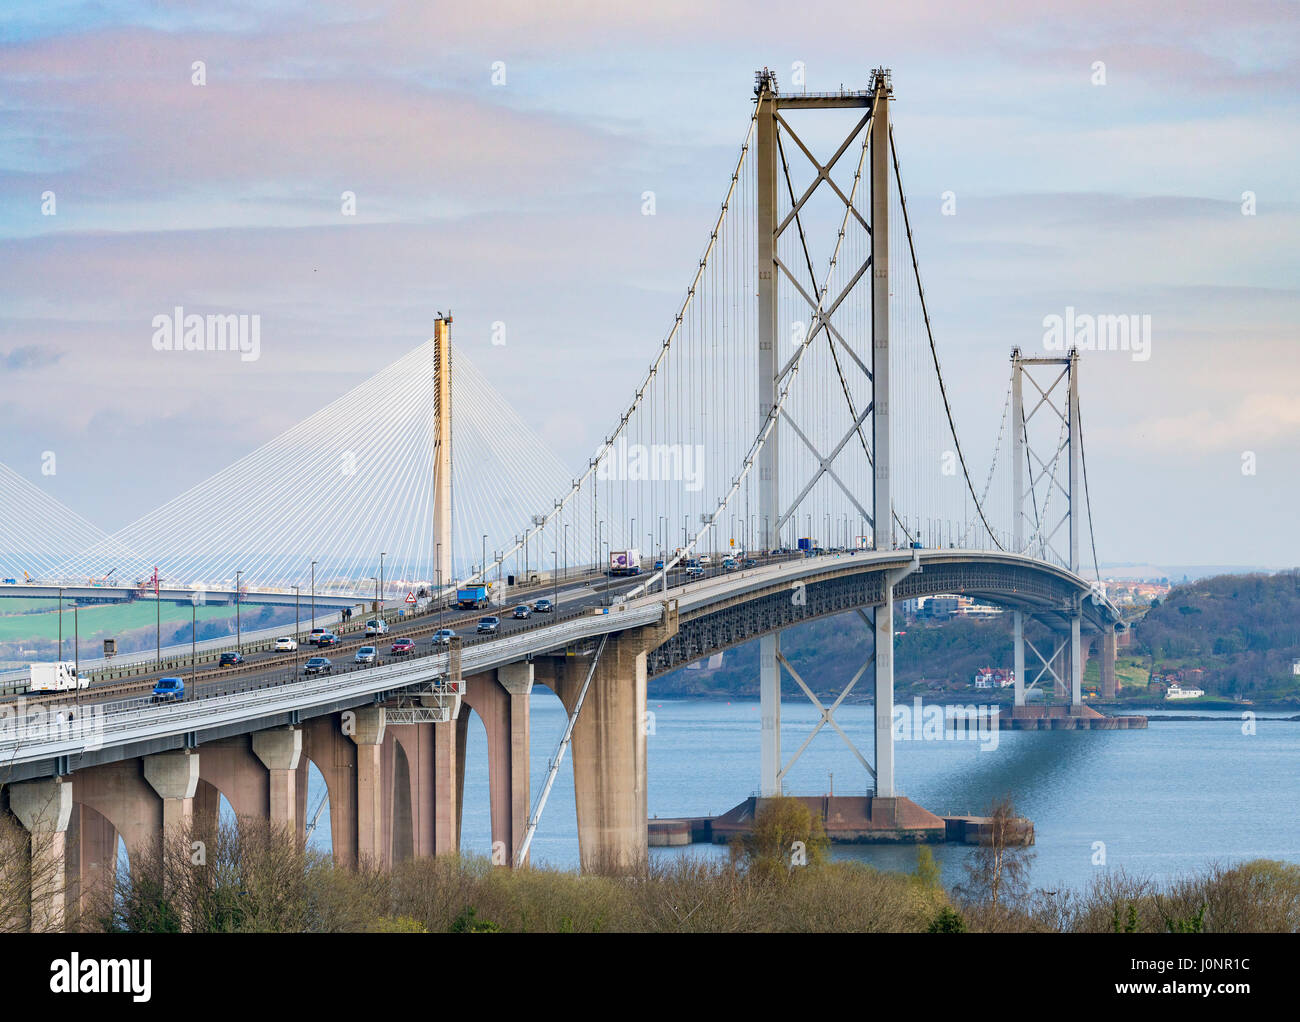 View of Forth Road Bridge and new Queensferry Bridge in distance under construction from South Queensferry, Scotland, United Kingdom Stock Photo